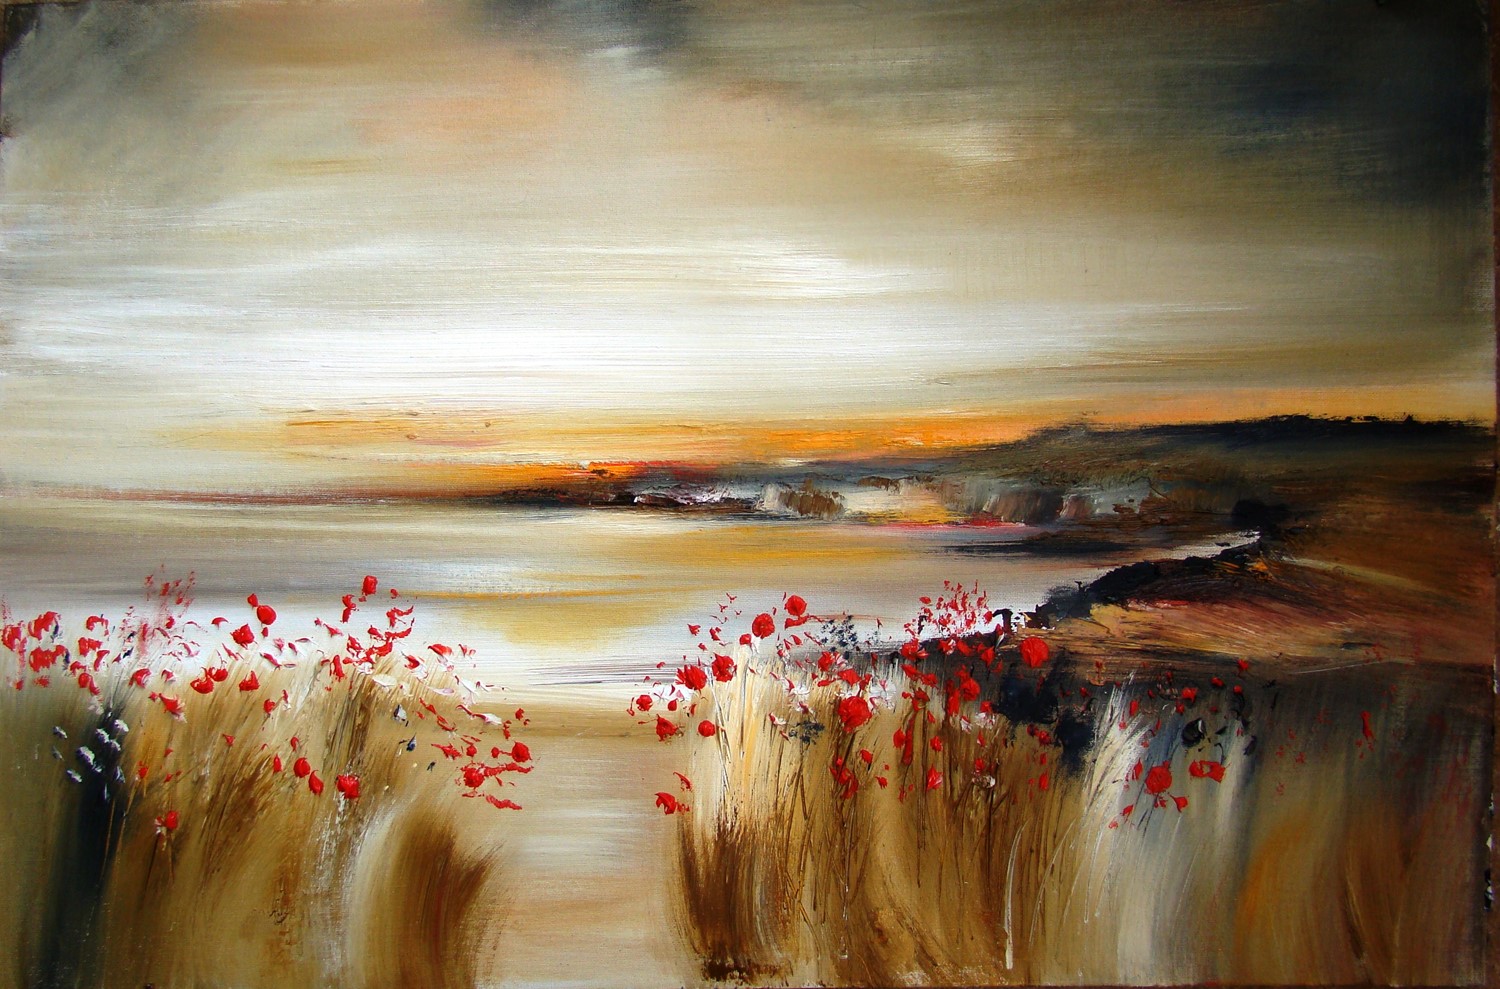 'Poppies as the sun goes down' by artist Rosanne Barr